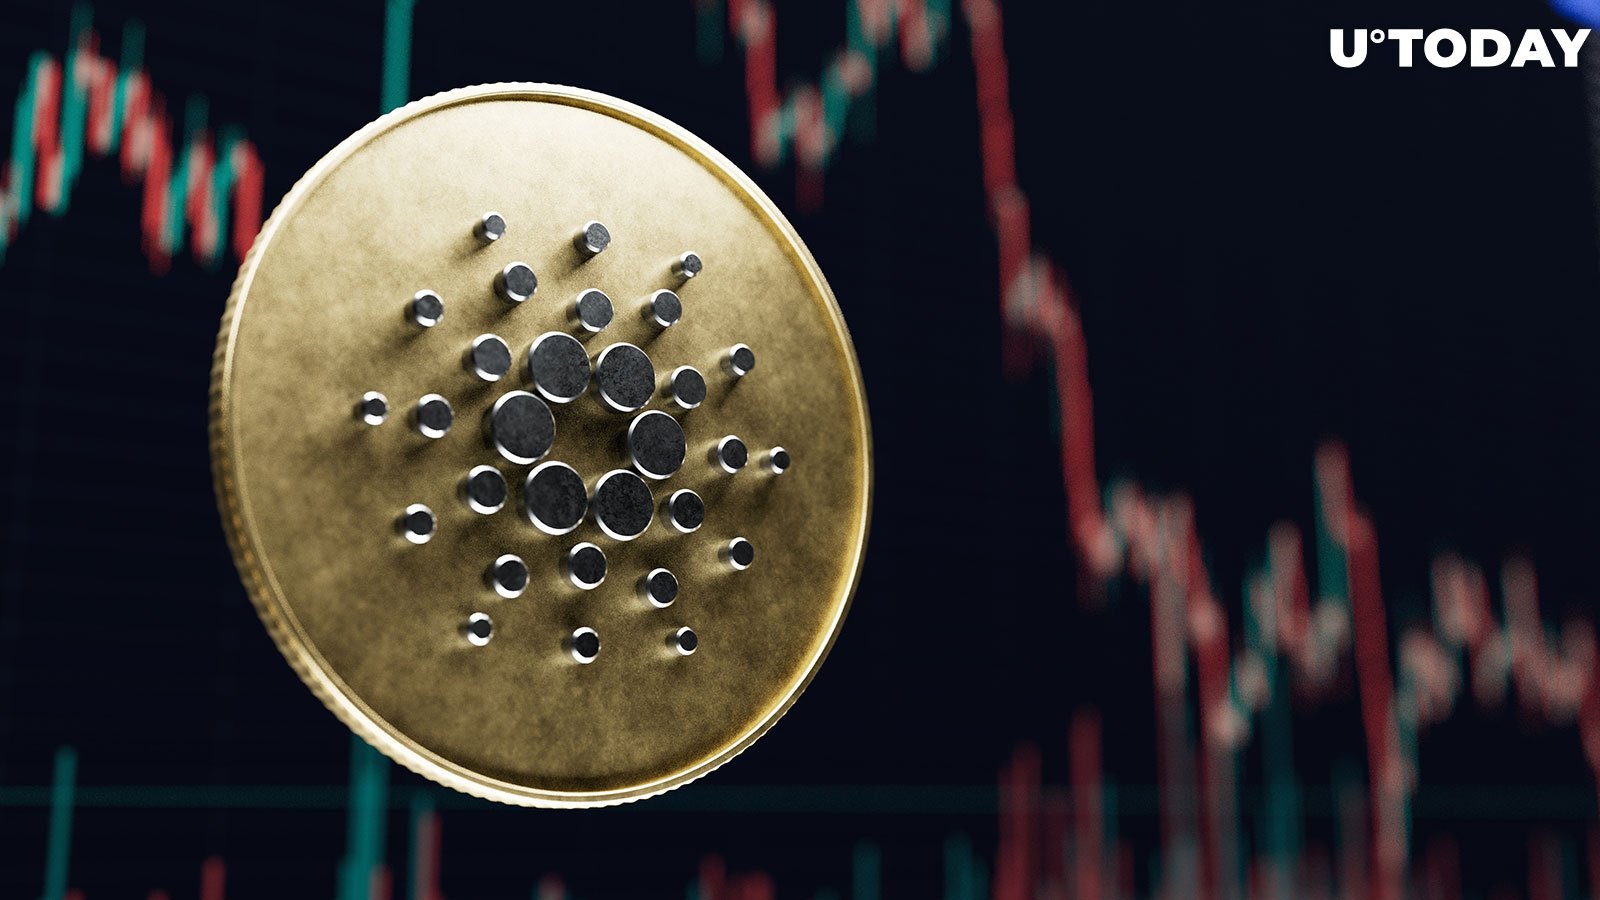 Cardano (ADA) Price at Risk of 30% Drop, Here's Why